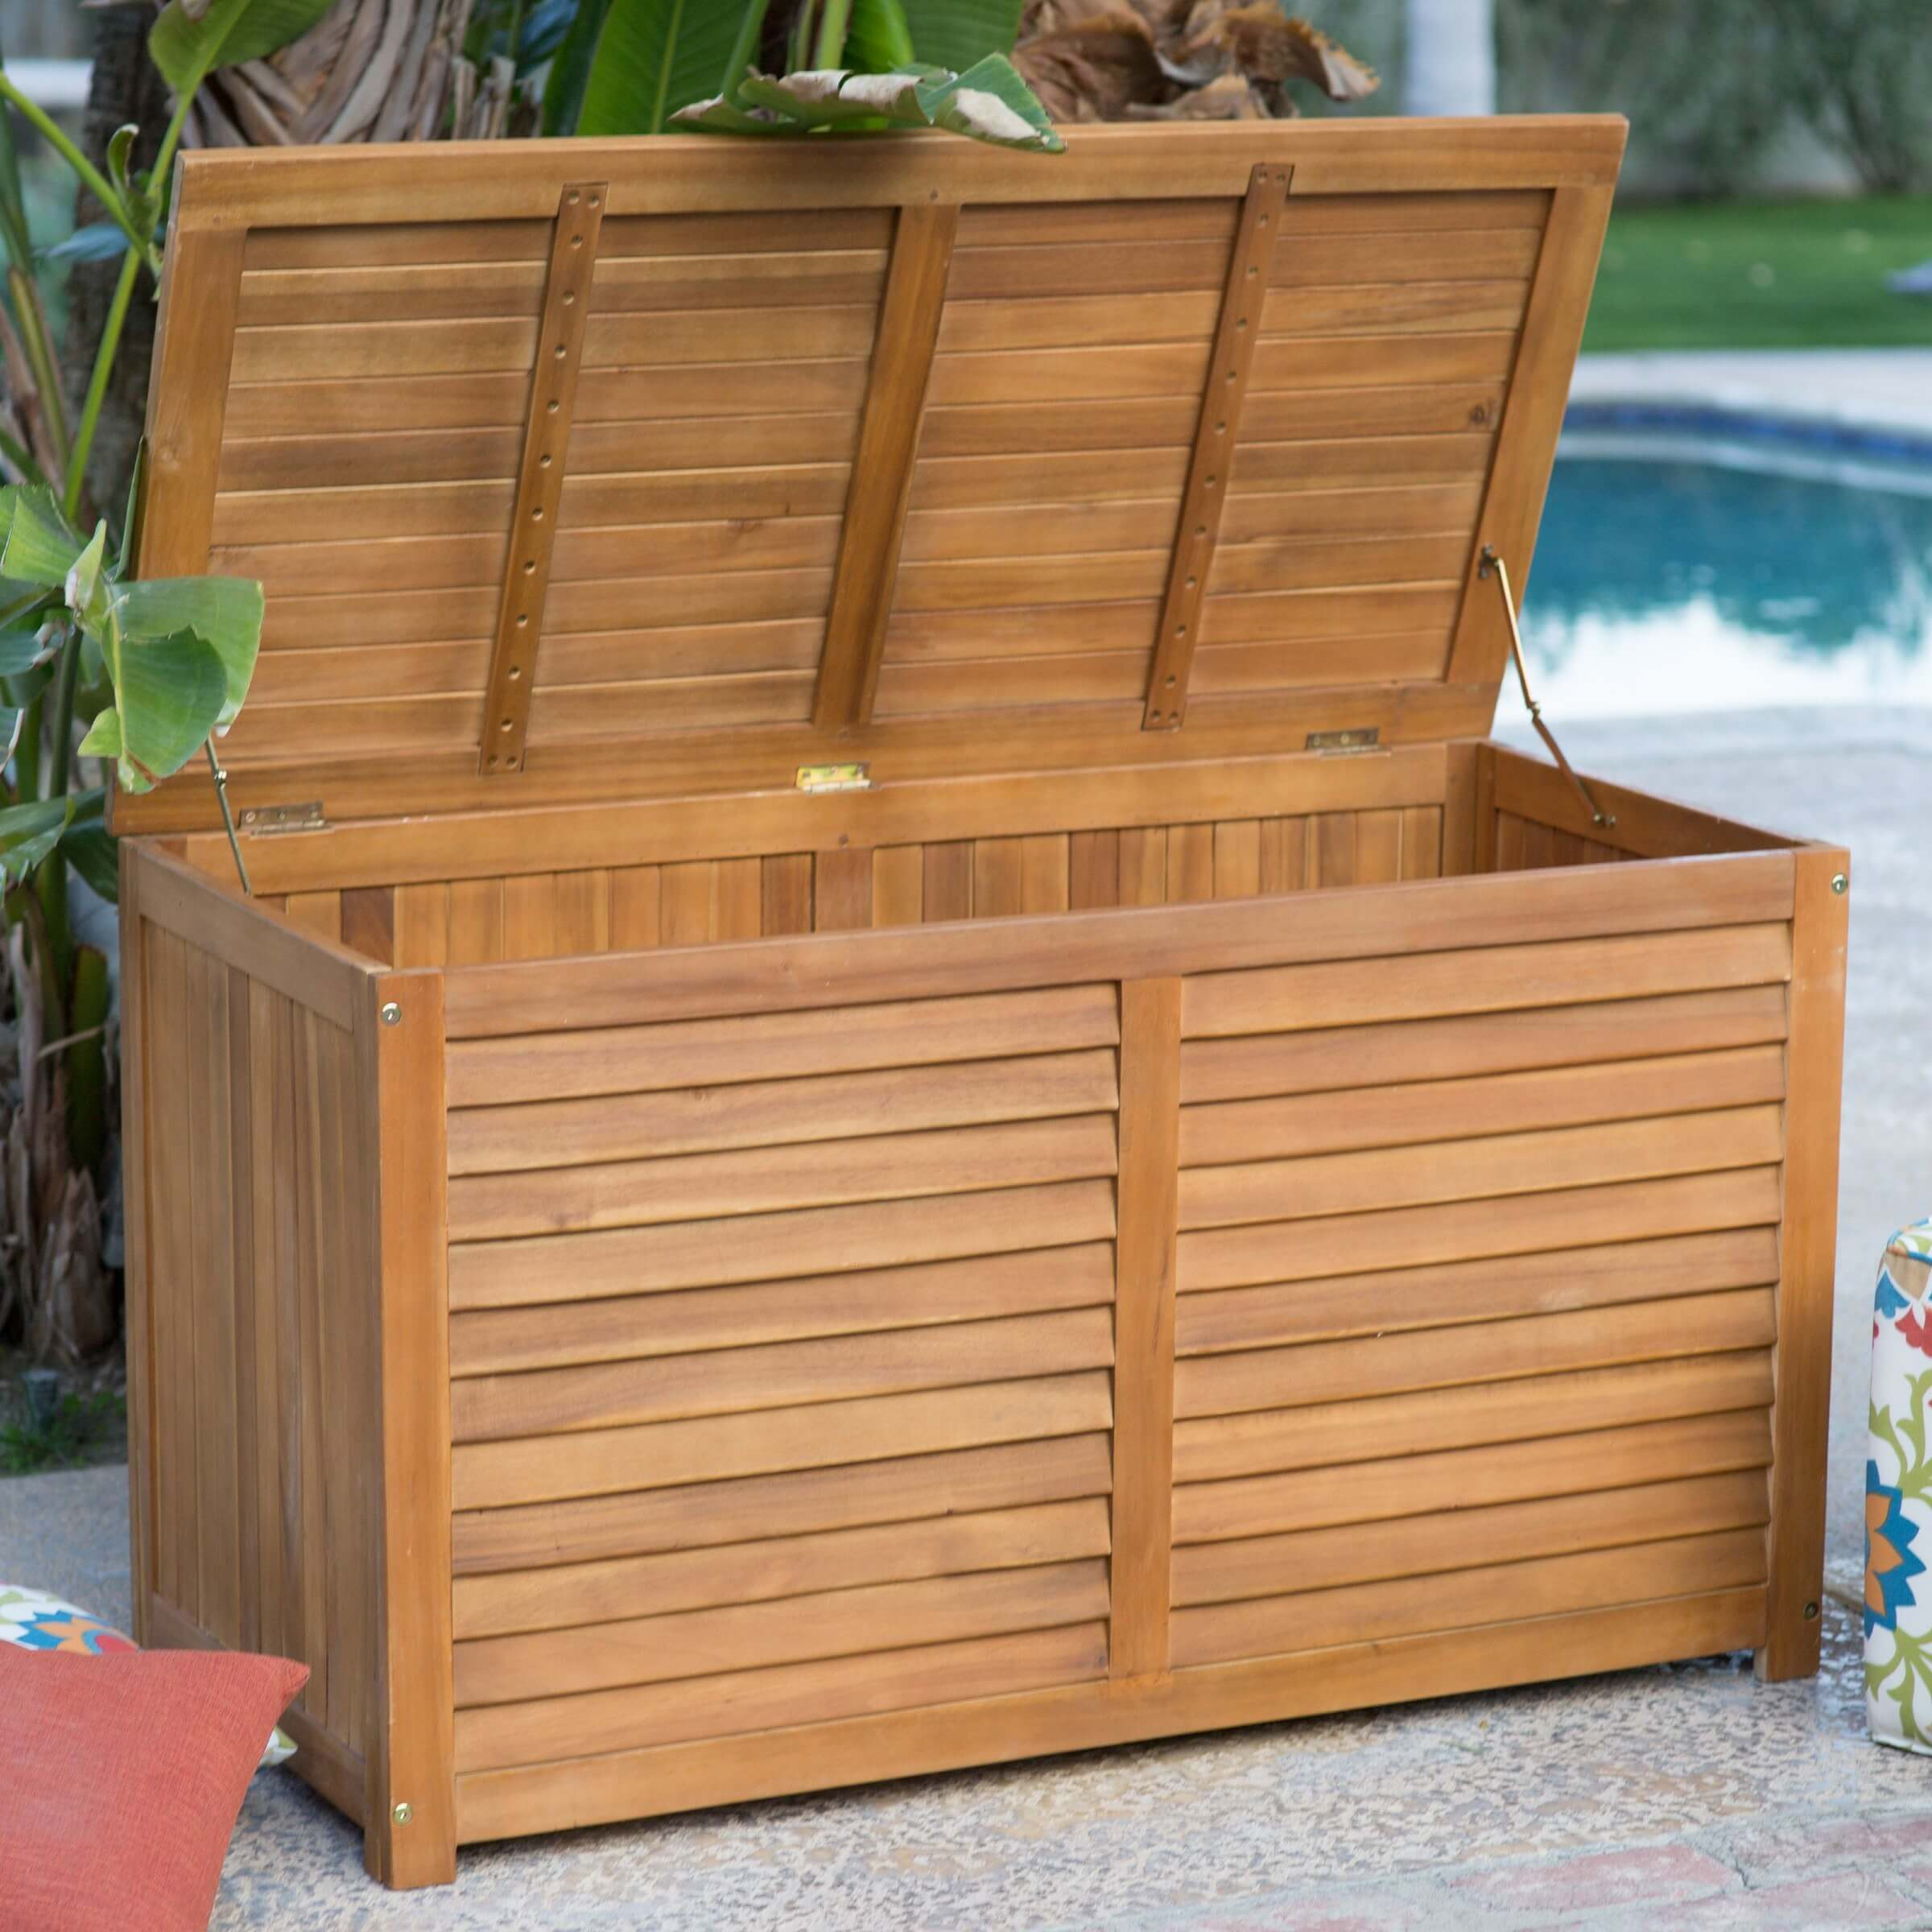 Top 10 Types Of Outdoor Deck Storage Boxes with dimensions 2400 X 2400